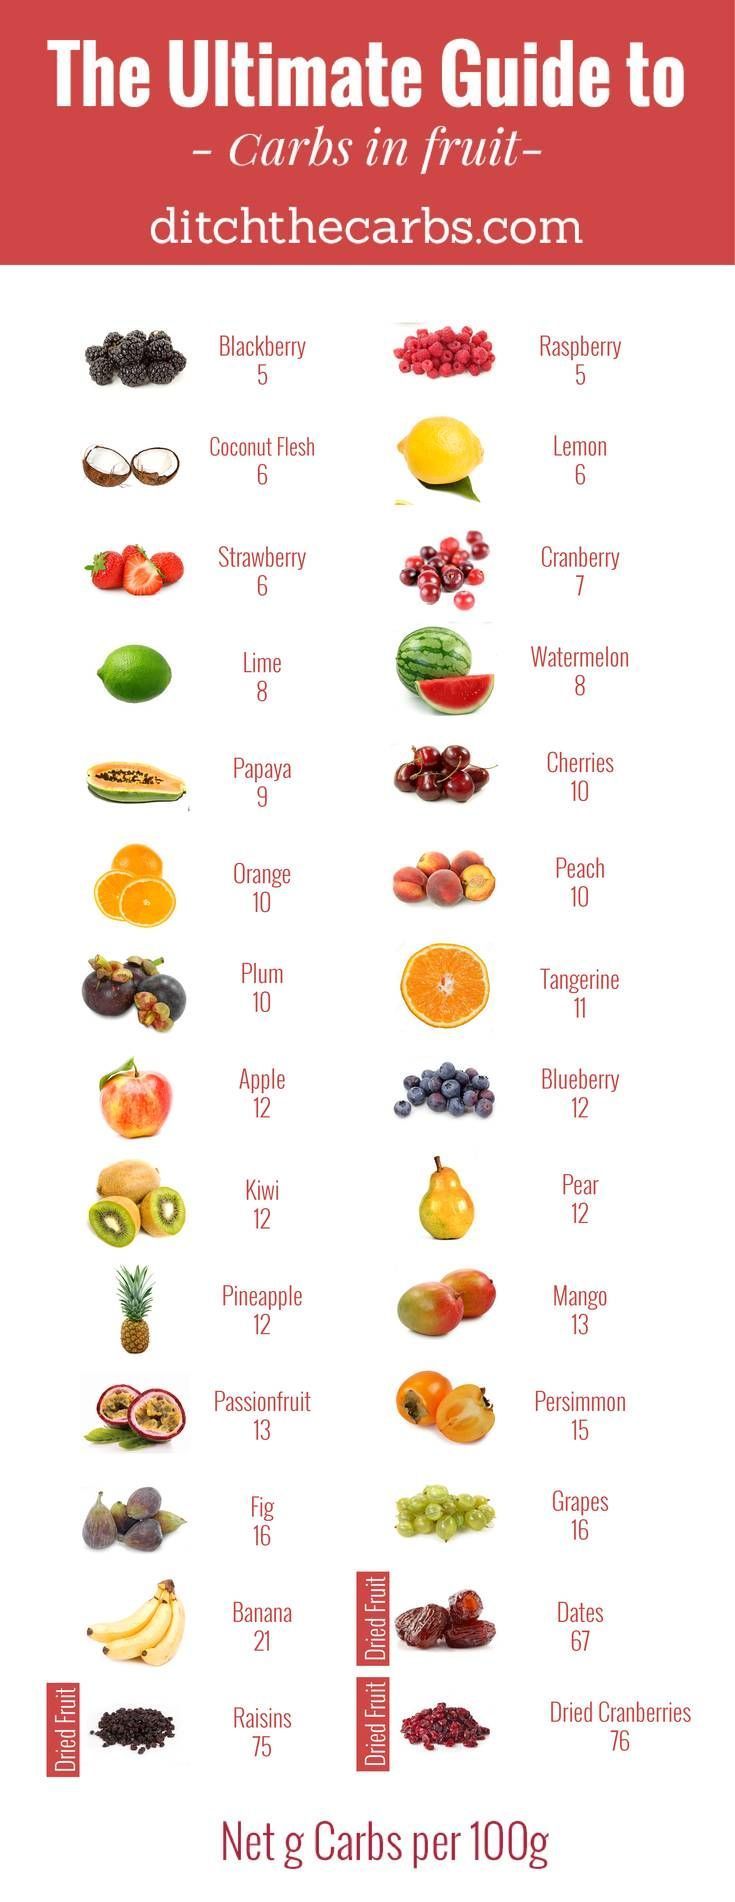 How many carbs are in fruit? That depends on which fruits you are talking about! Here are the carbohydrate counts for 28 different